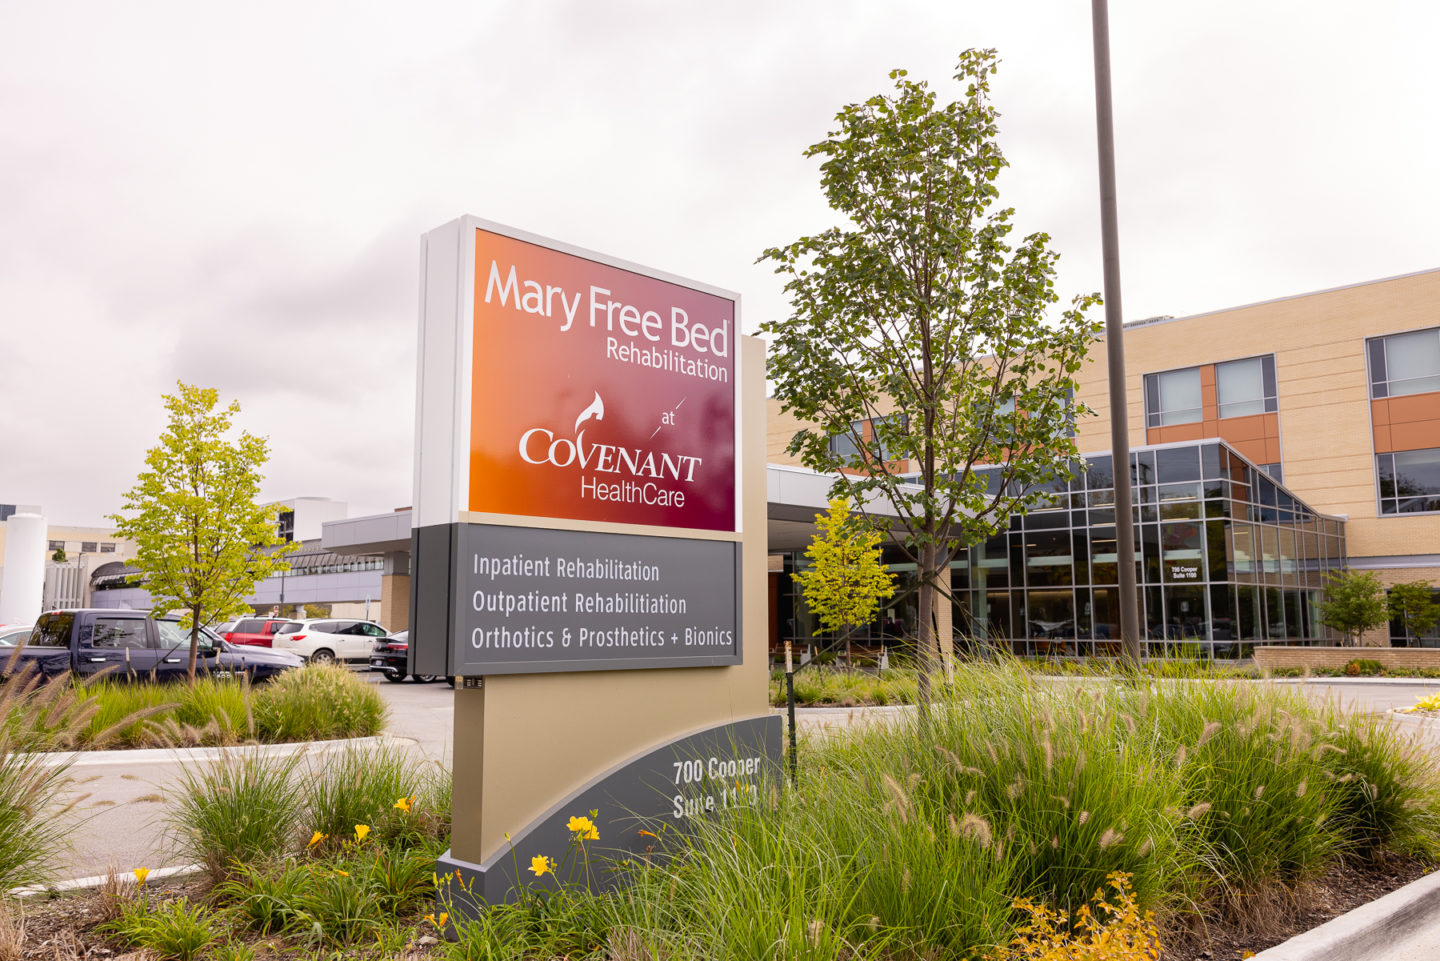 Photo of the exterior of Mary Free Bed at Covenant HealthCare hospital